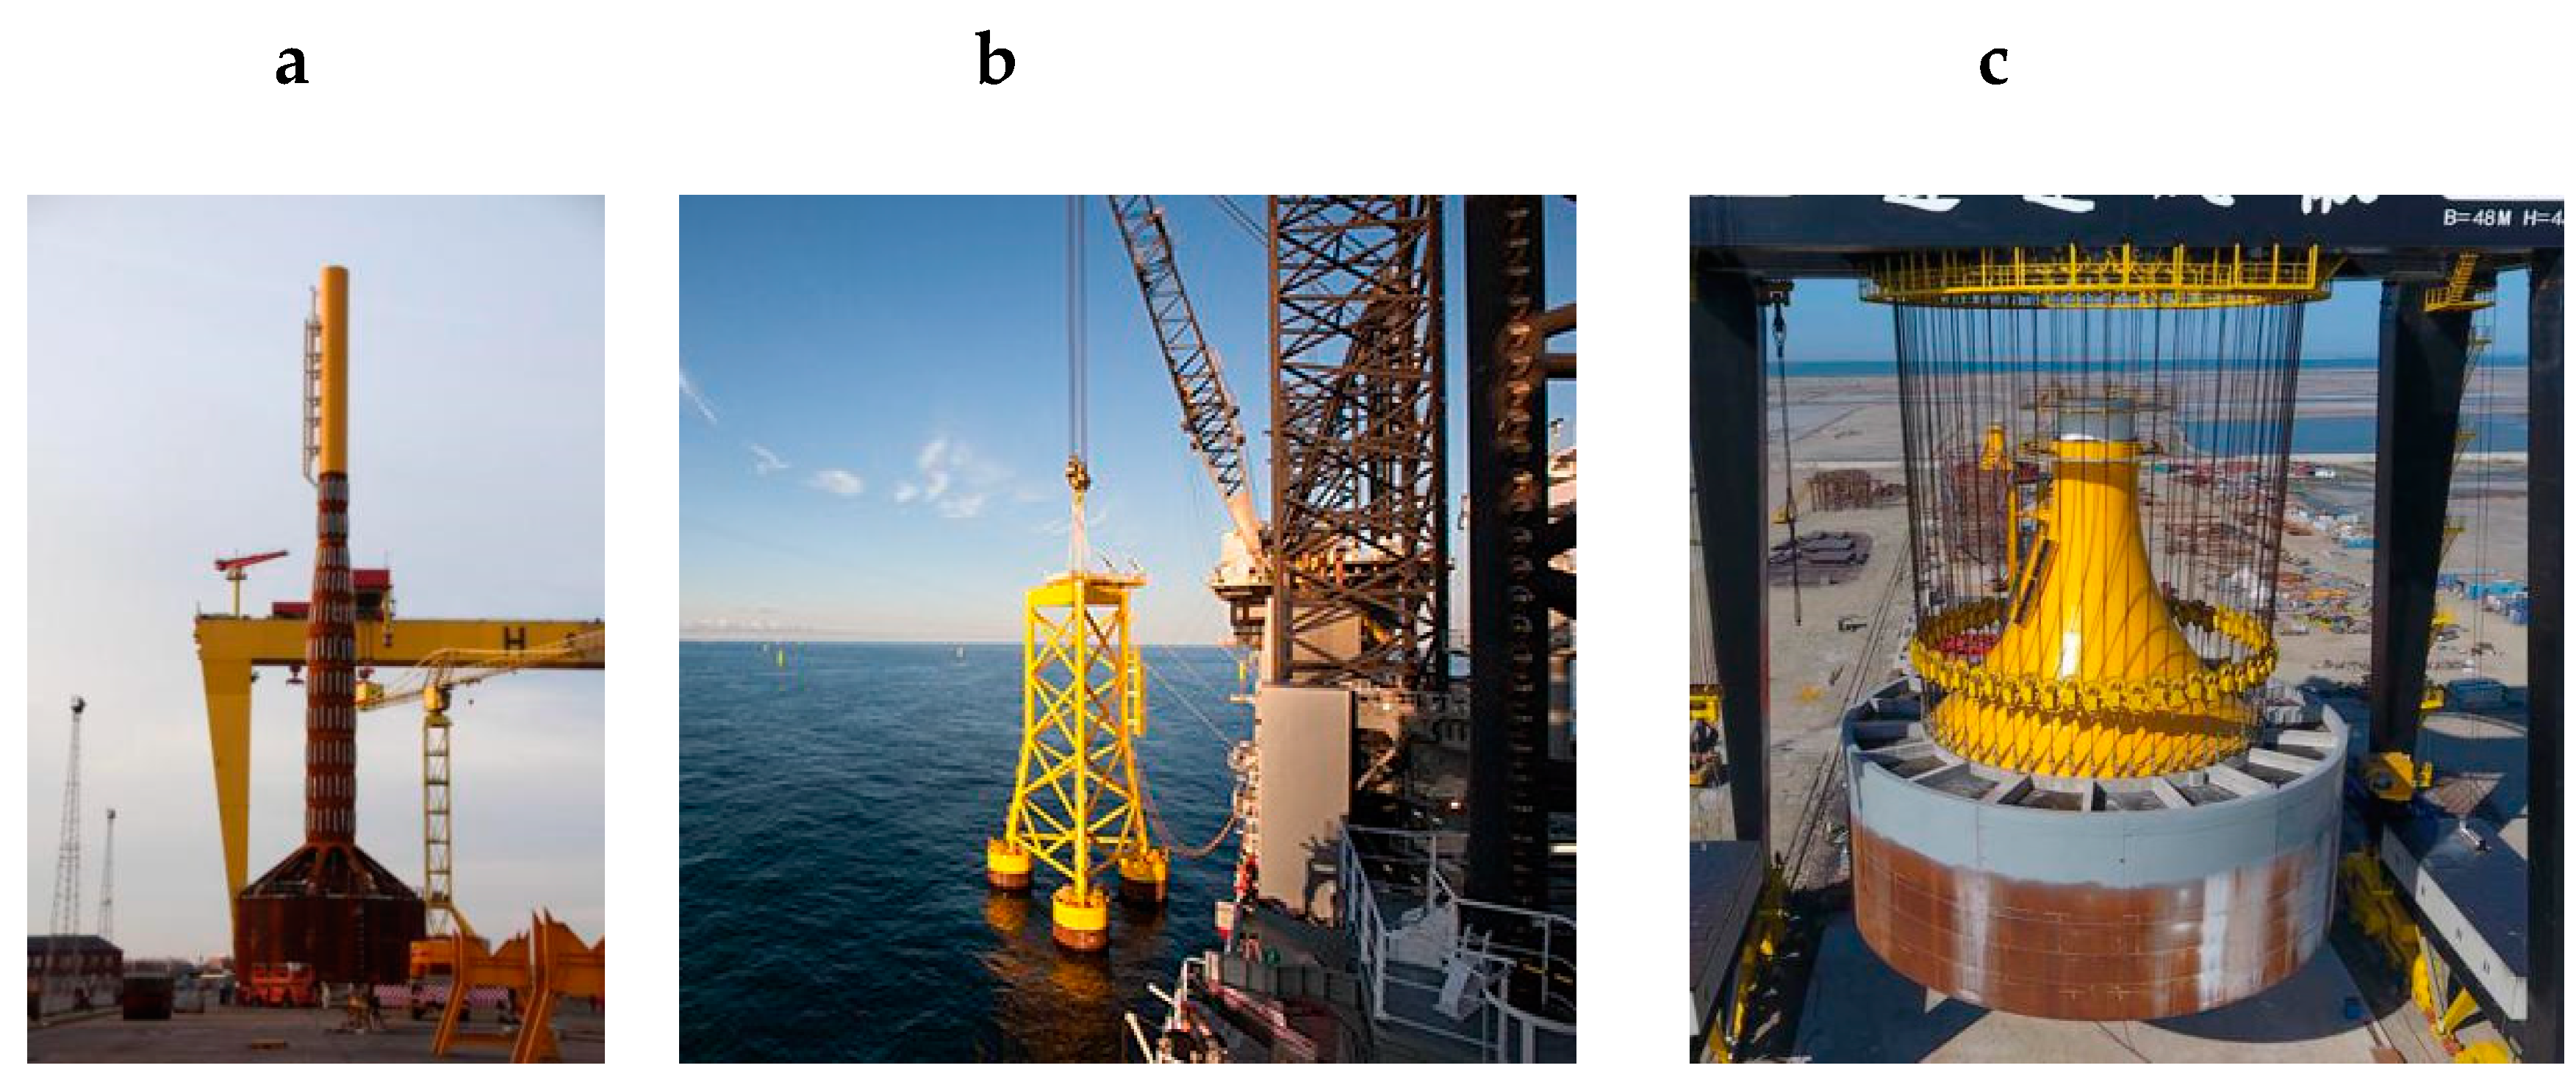 Energies | Free Full-Text | Air-Floating Characteristics of Large-Diameter  Multi-Bucket Foundation for Offshore Wind Turbines